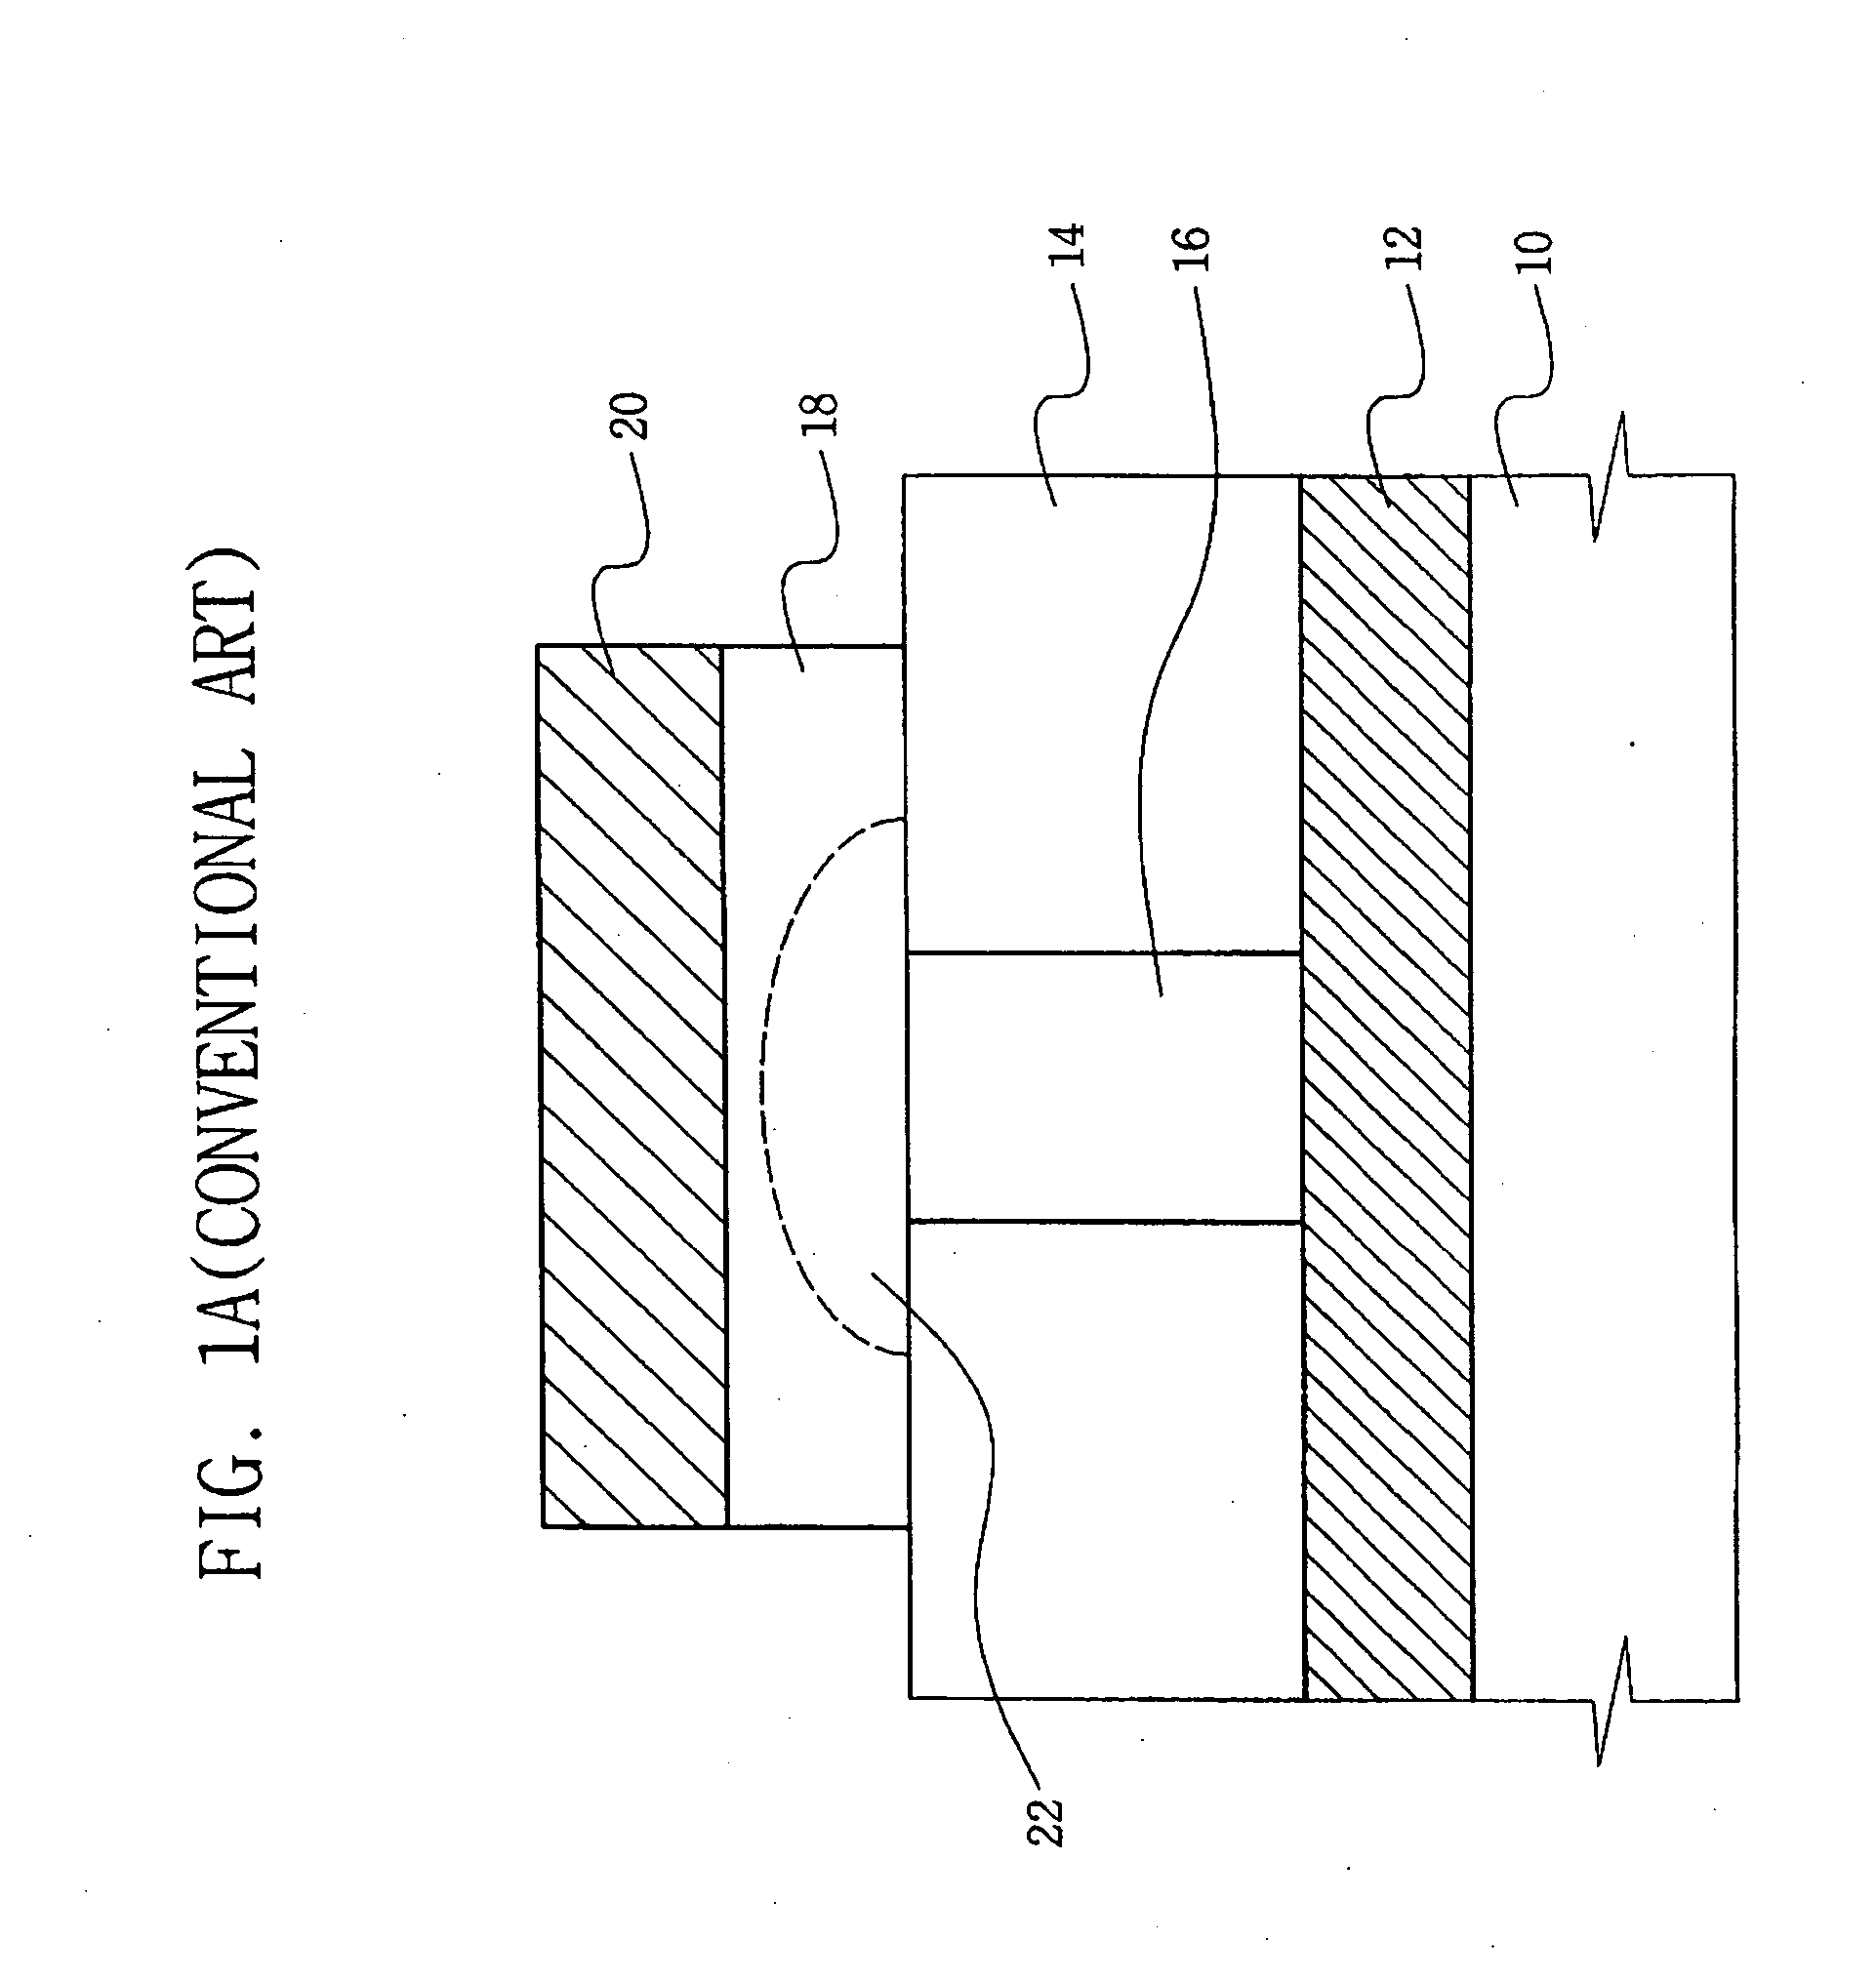 Phase-change memory device and methods of fabricating the same